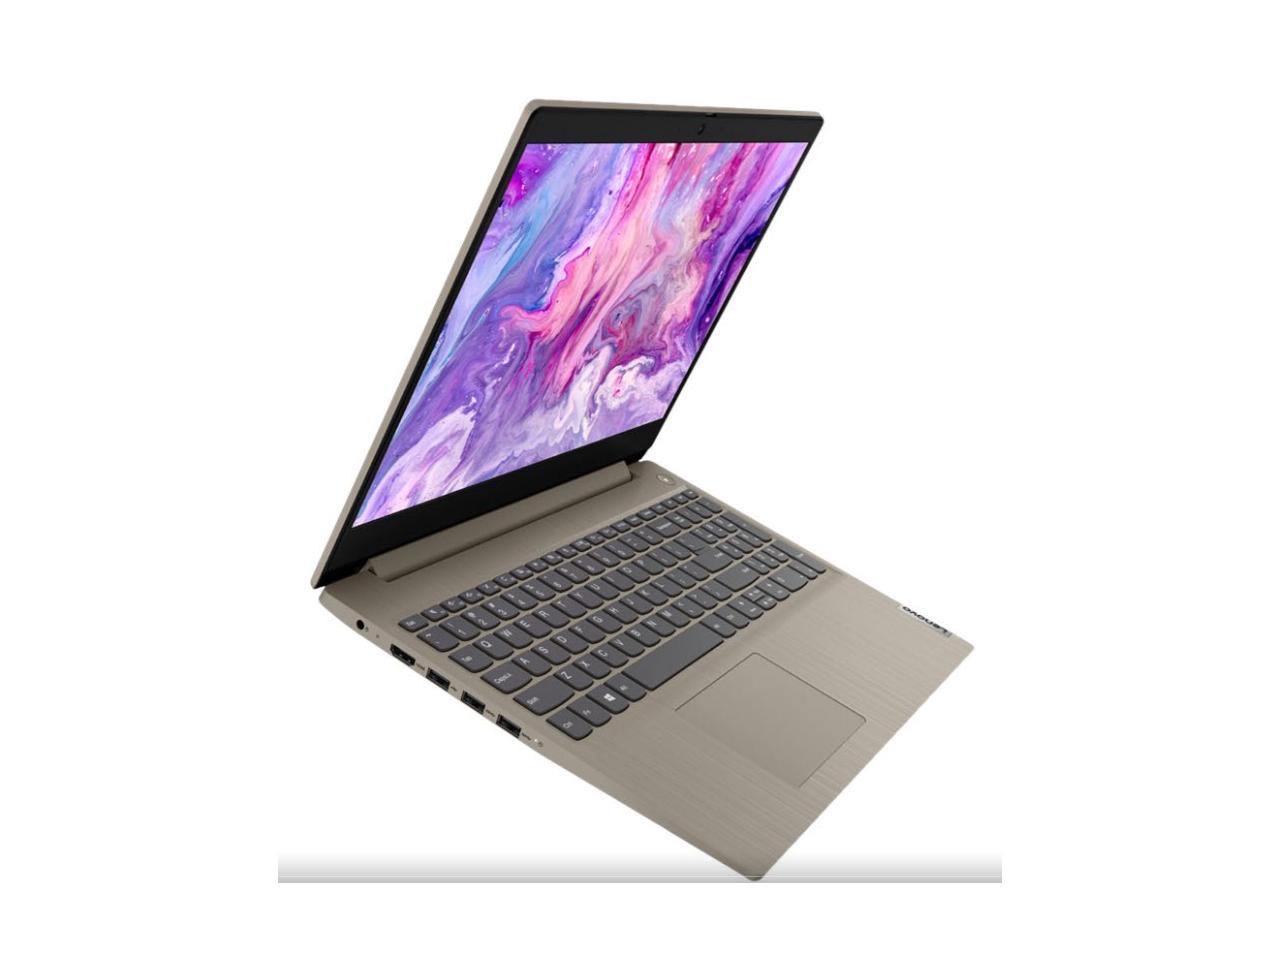 Lenovo IdeaPad 3 81WE002ACF 15.6" Notebook, 1.0GHz Intel Core i5-1035G1,256GB SSD,8GB DDR4,Win10Home - Atlas Computers & Electronics 